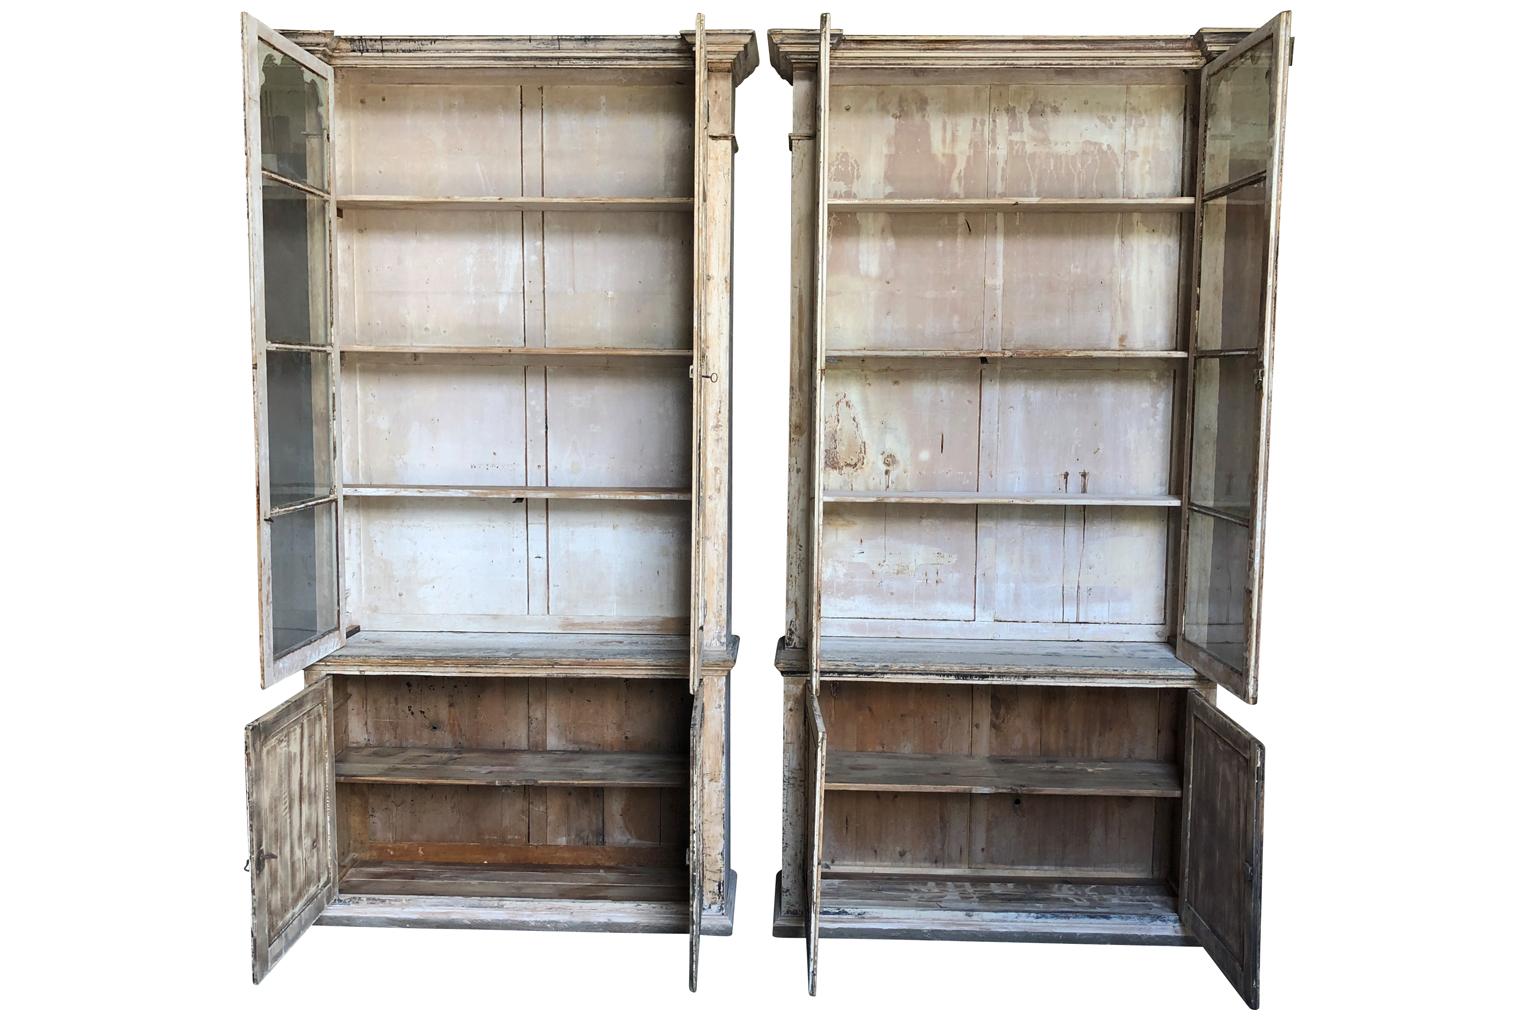 An outstanding pair of 19th century bookcases from the South of France. Beautifully constructed from painted and scraped wood. Wonderful glass and patina. The width at the crown measures 59 1/8